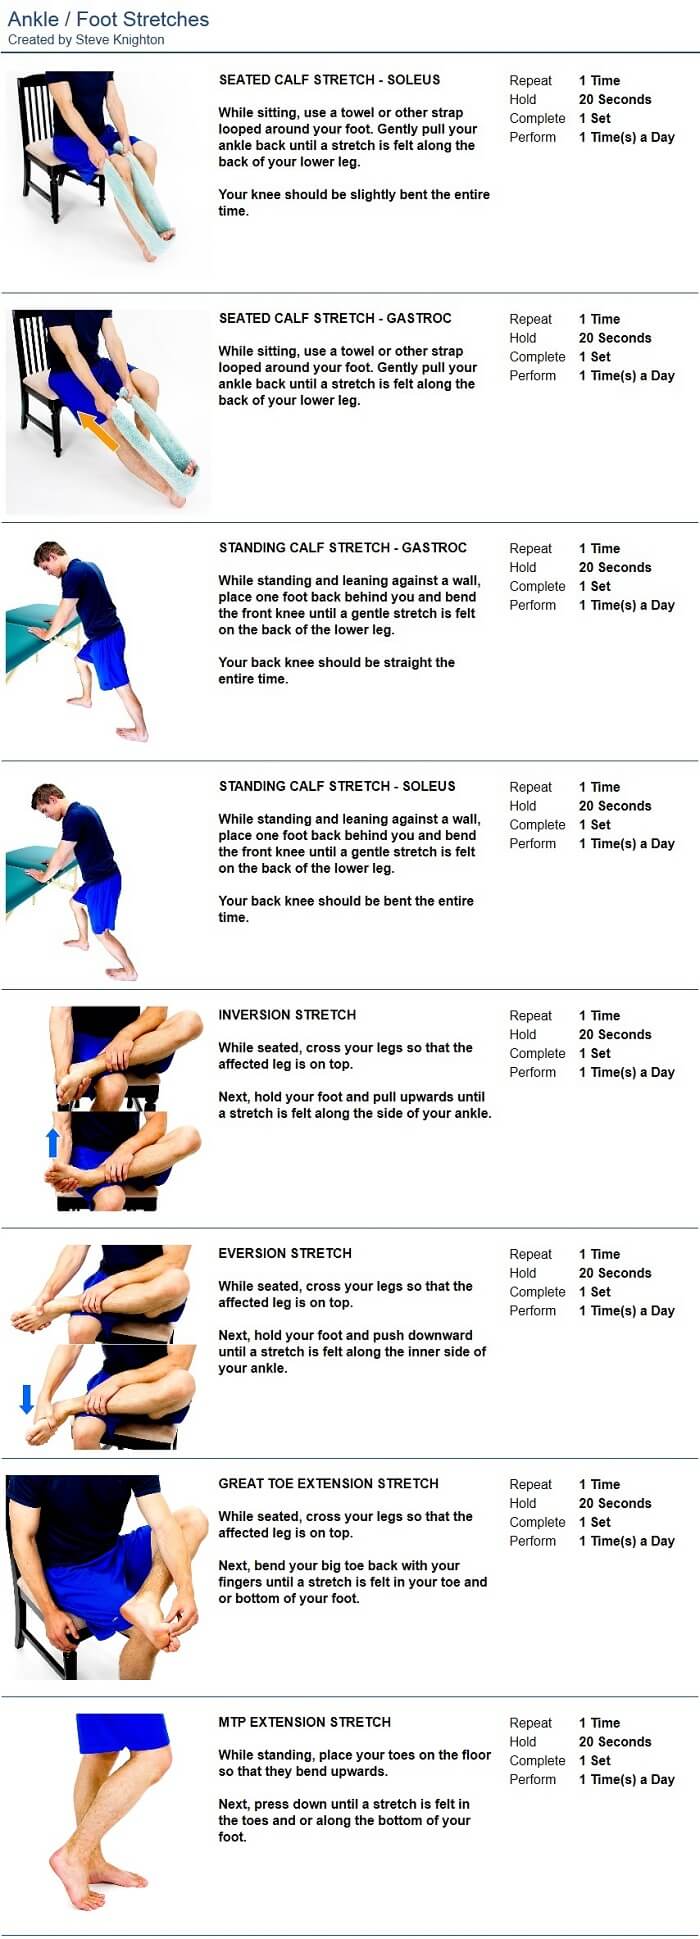 Ankle Foot Stretches